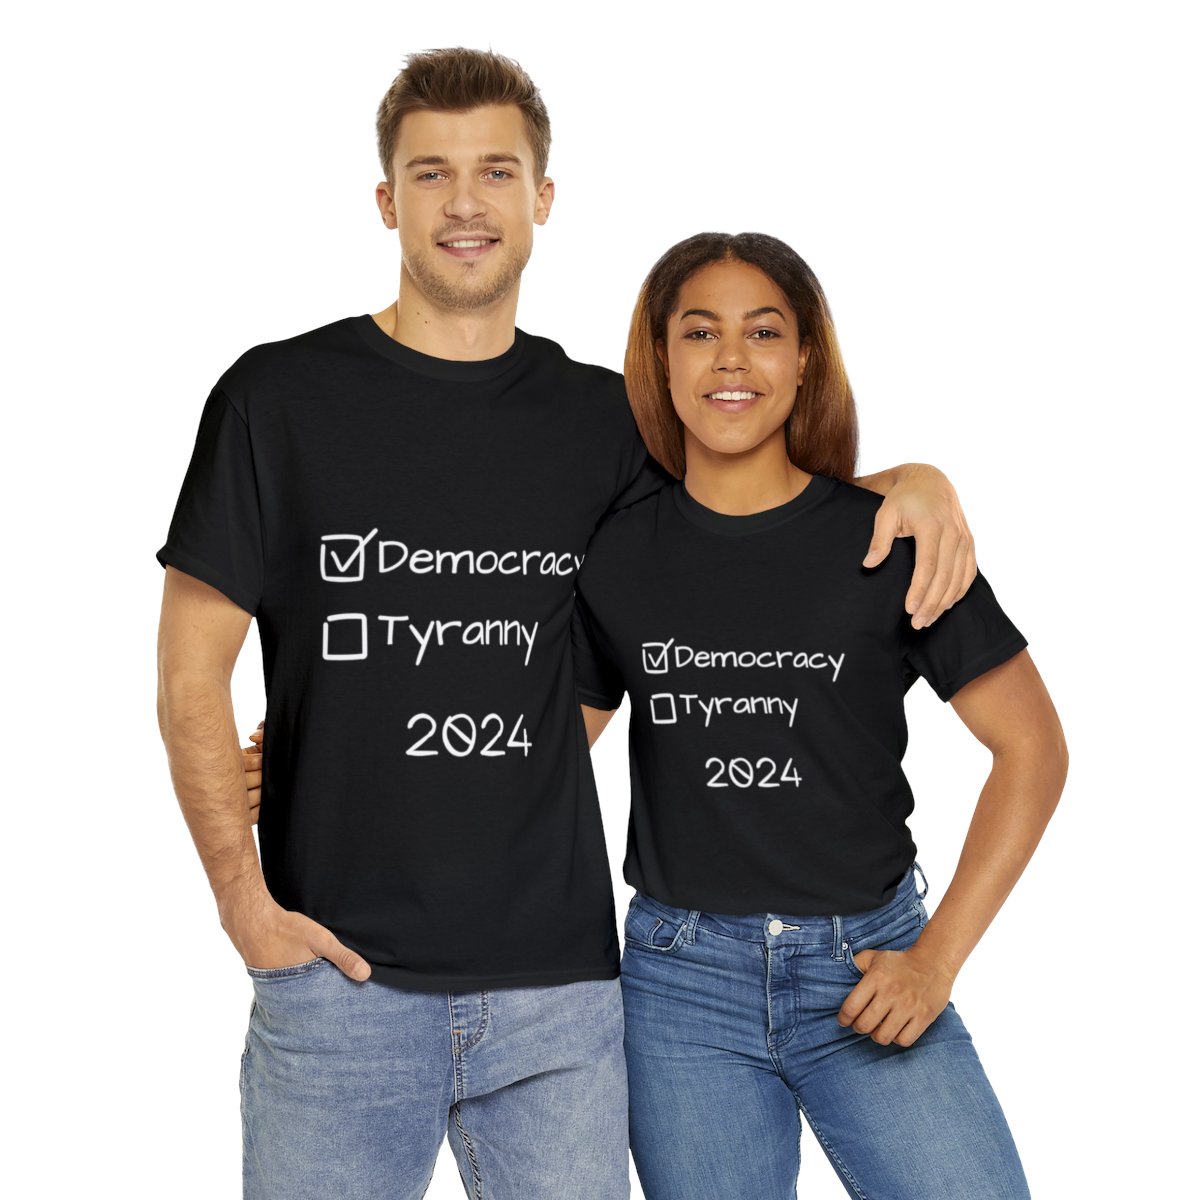 Democracy is on the ballot in 2024.  The next choice, not the last choice.  🇺

#vote #democracy #election2024 #usa #politics #voting #nationalvoterregistrationday #electionday #yourvotematters

👉 👉 👉Show your support, get the Tshirt or gear here: democratees.printify.me/products🇺